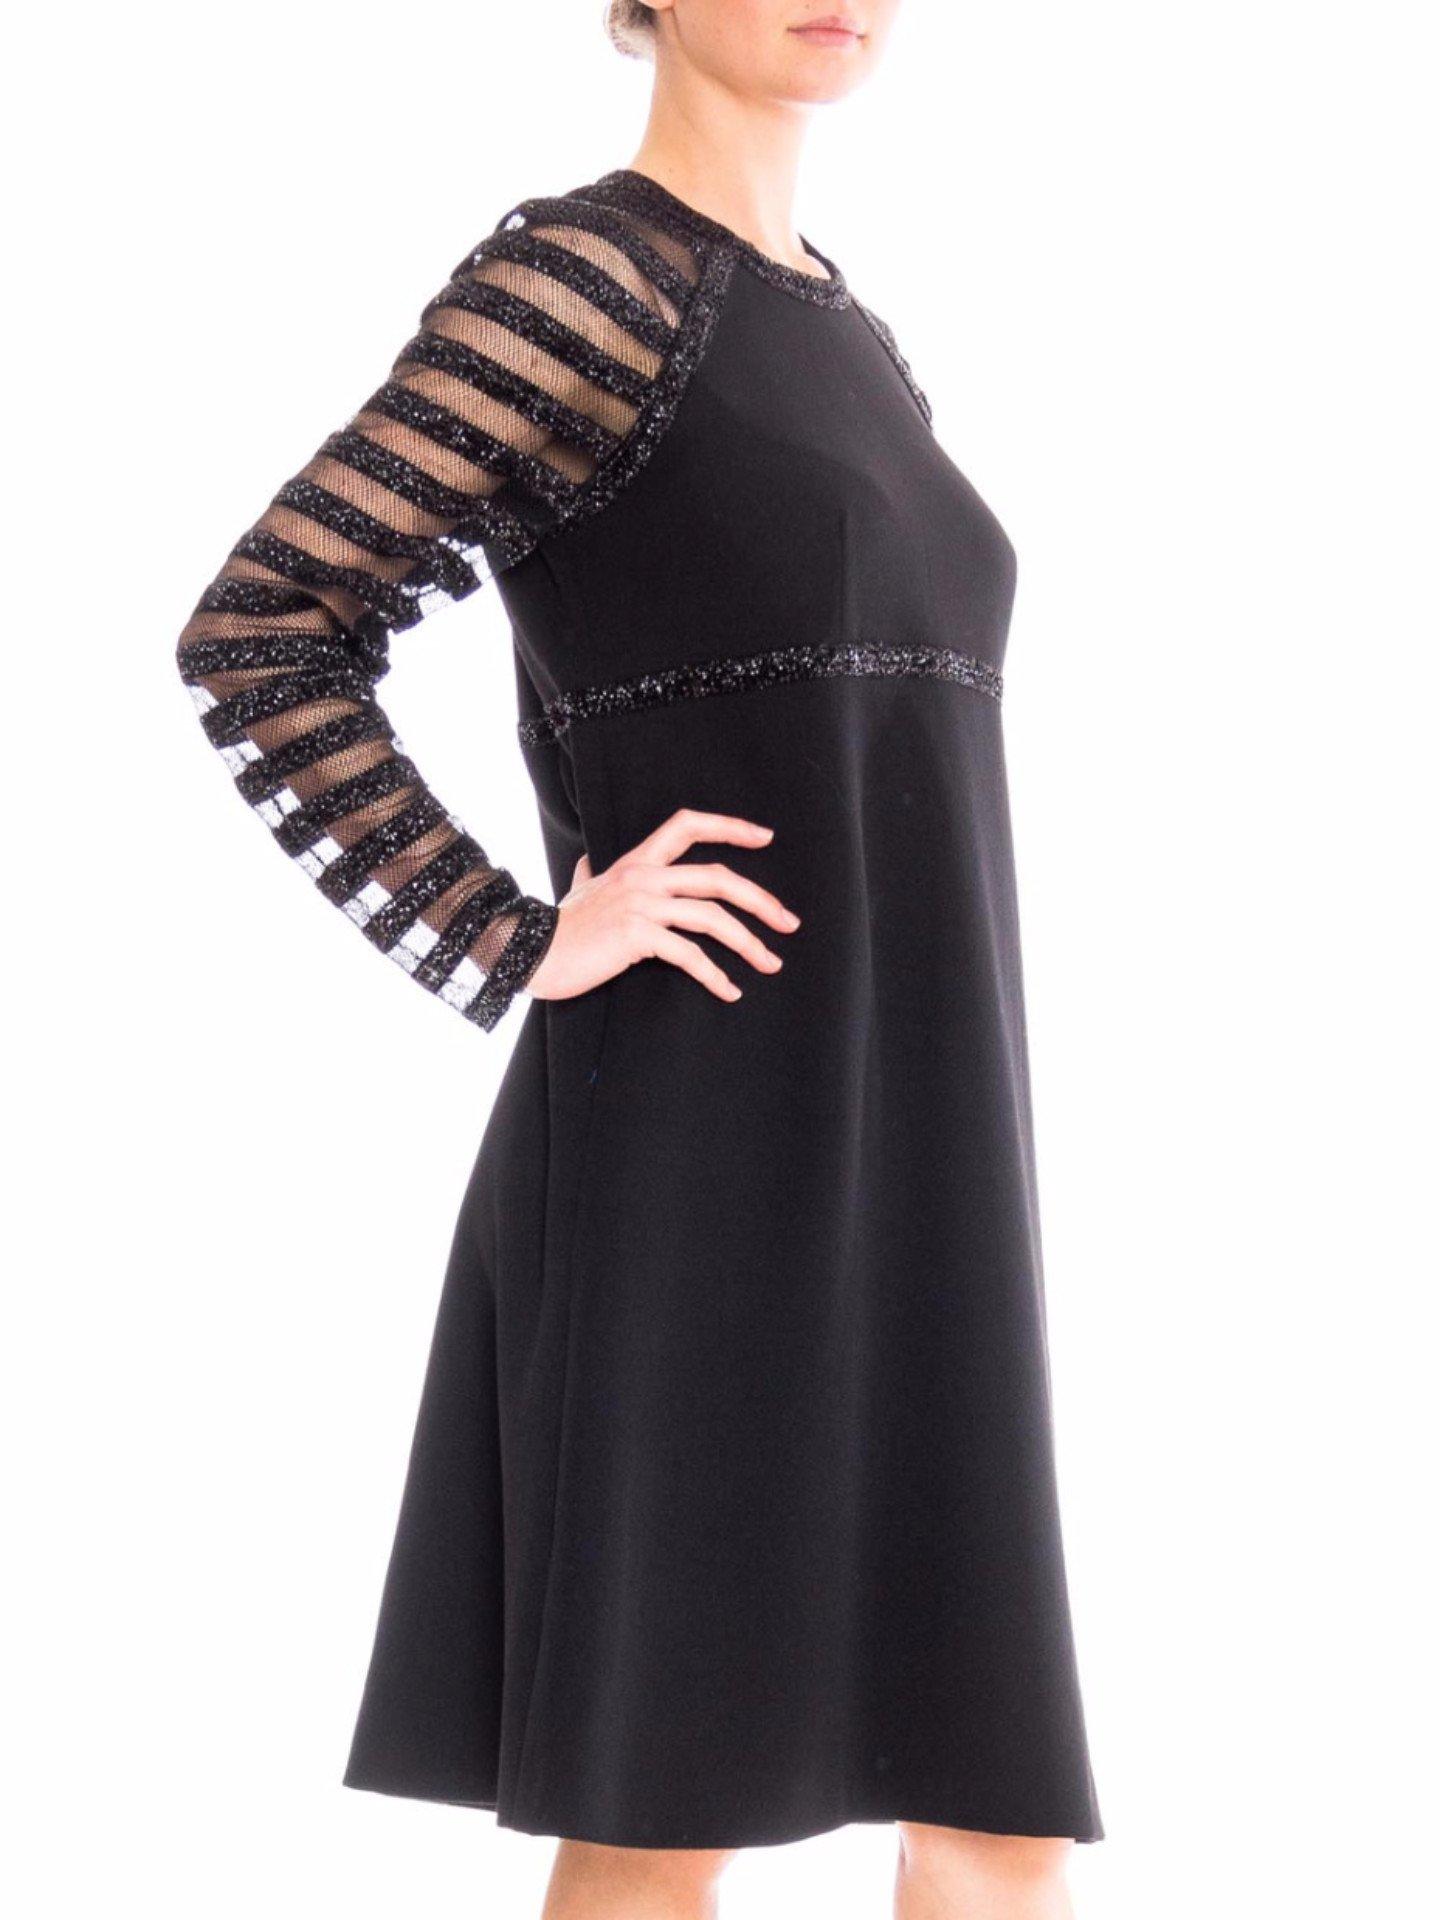 1960S JACQUELINE VANOYE Black Polyester Knit MOD Cocktail Dress With Mesh Lurex In Excellent Condition For Sale In New York, NY